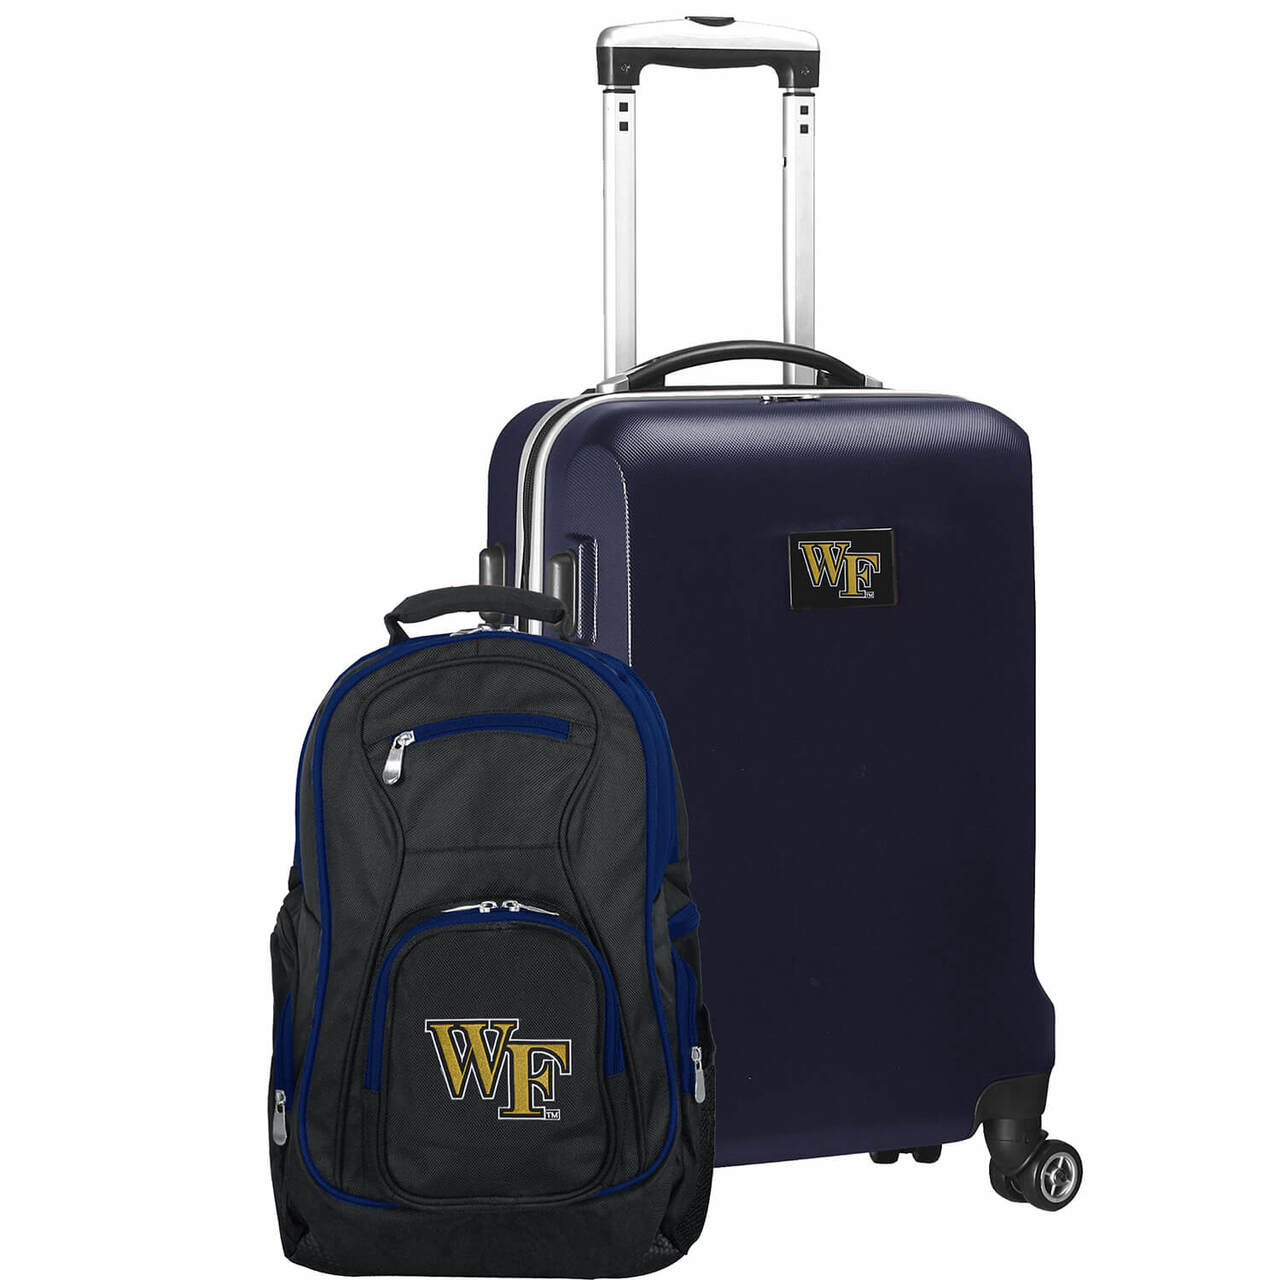 Wake Forest Demon Deacons Deluxe 2-Piece Backpack and Carry-on Set in Navy